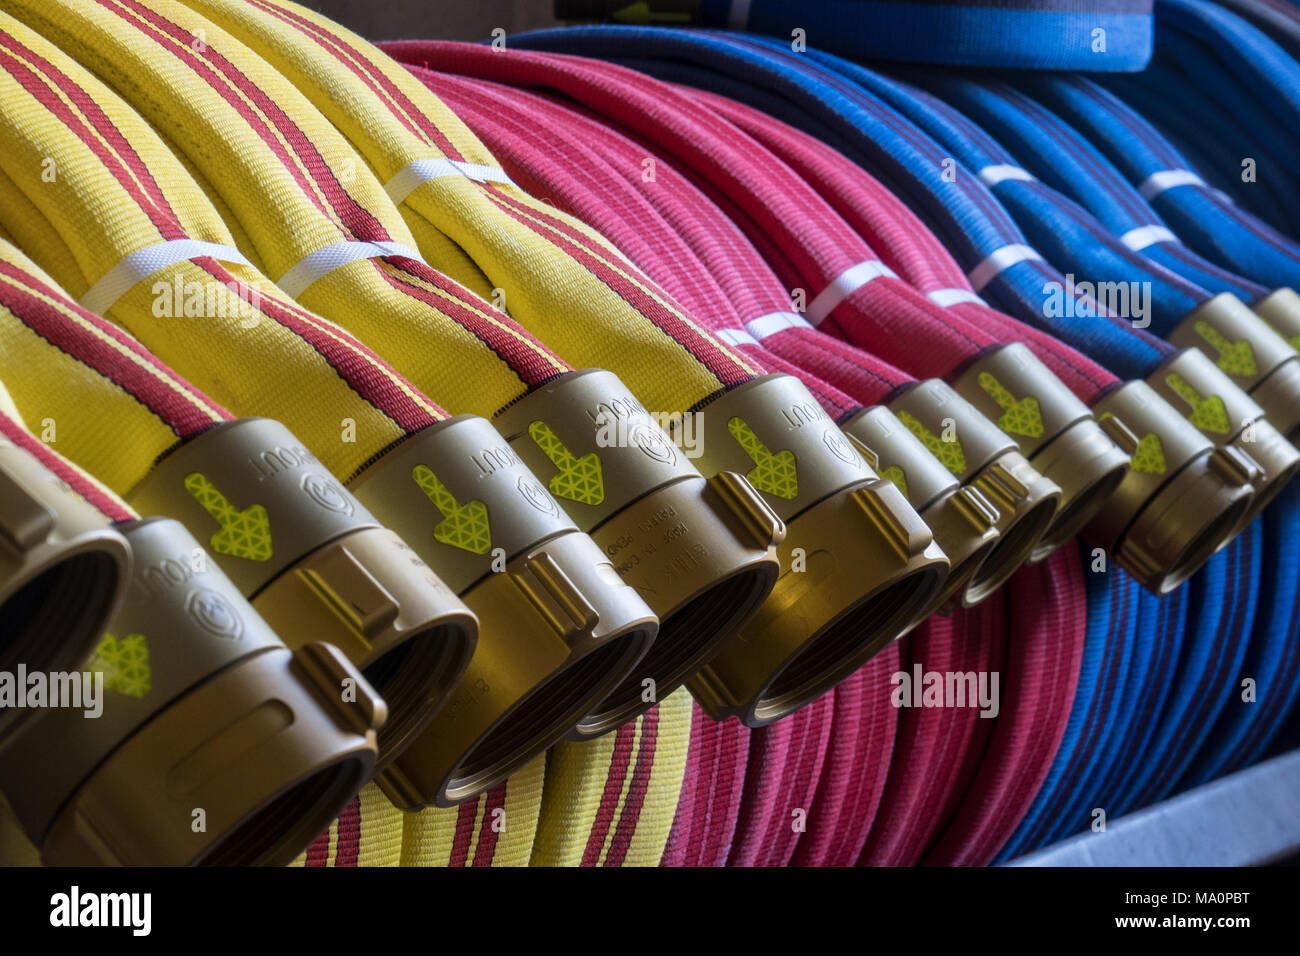 Close-up of coiled fire hose Stock Photo by ©ysbrand 145919407